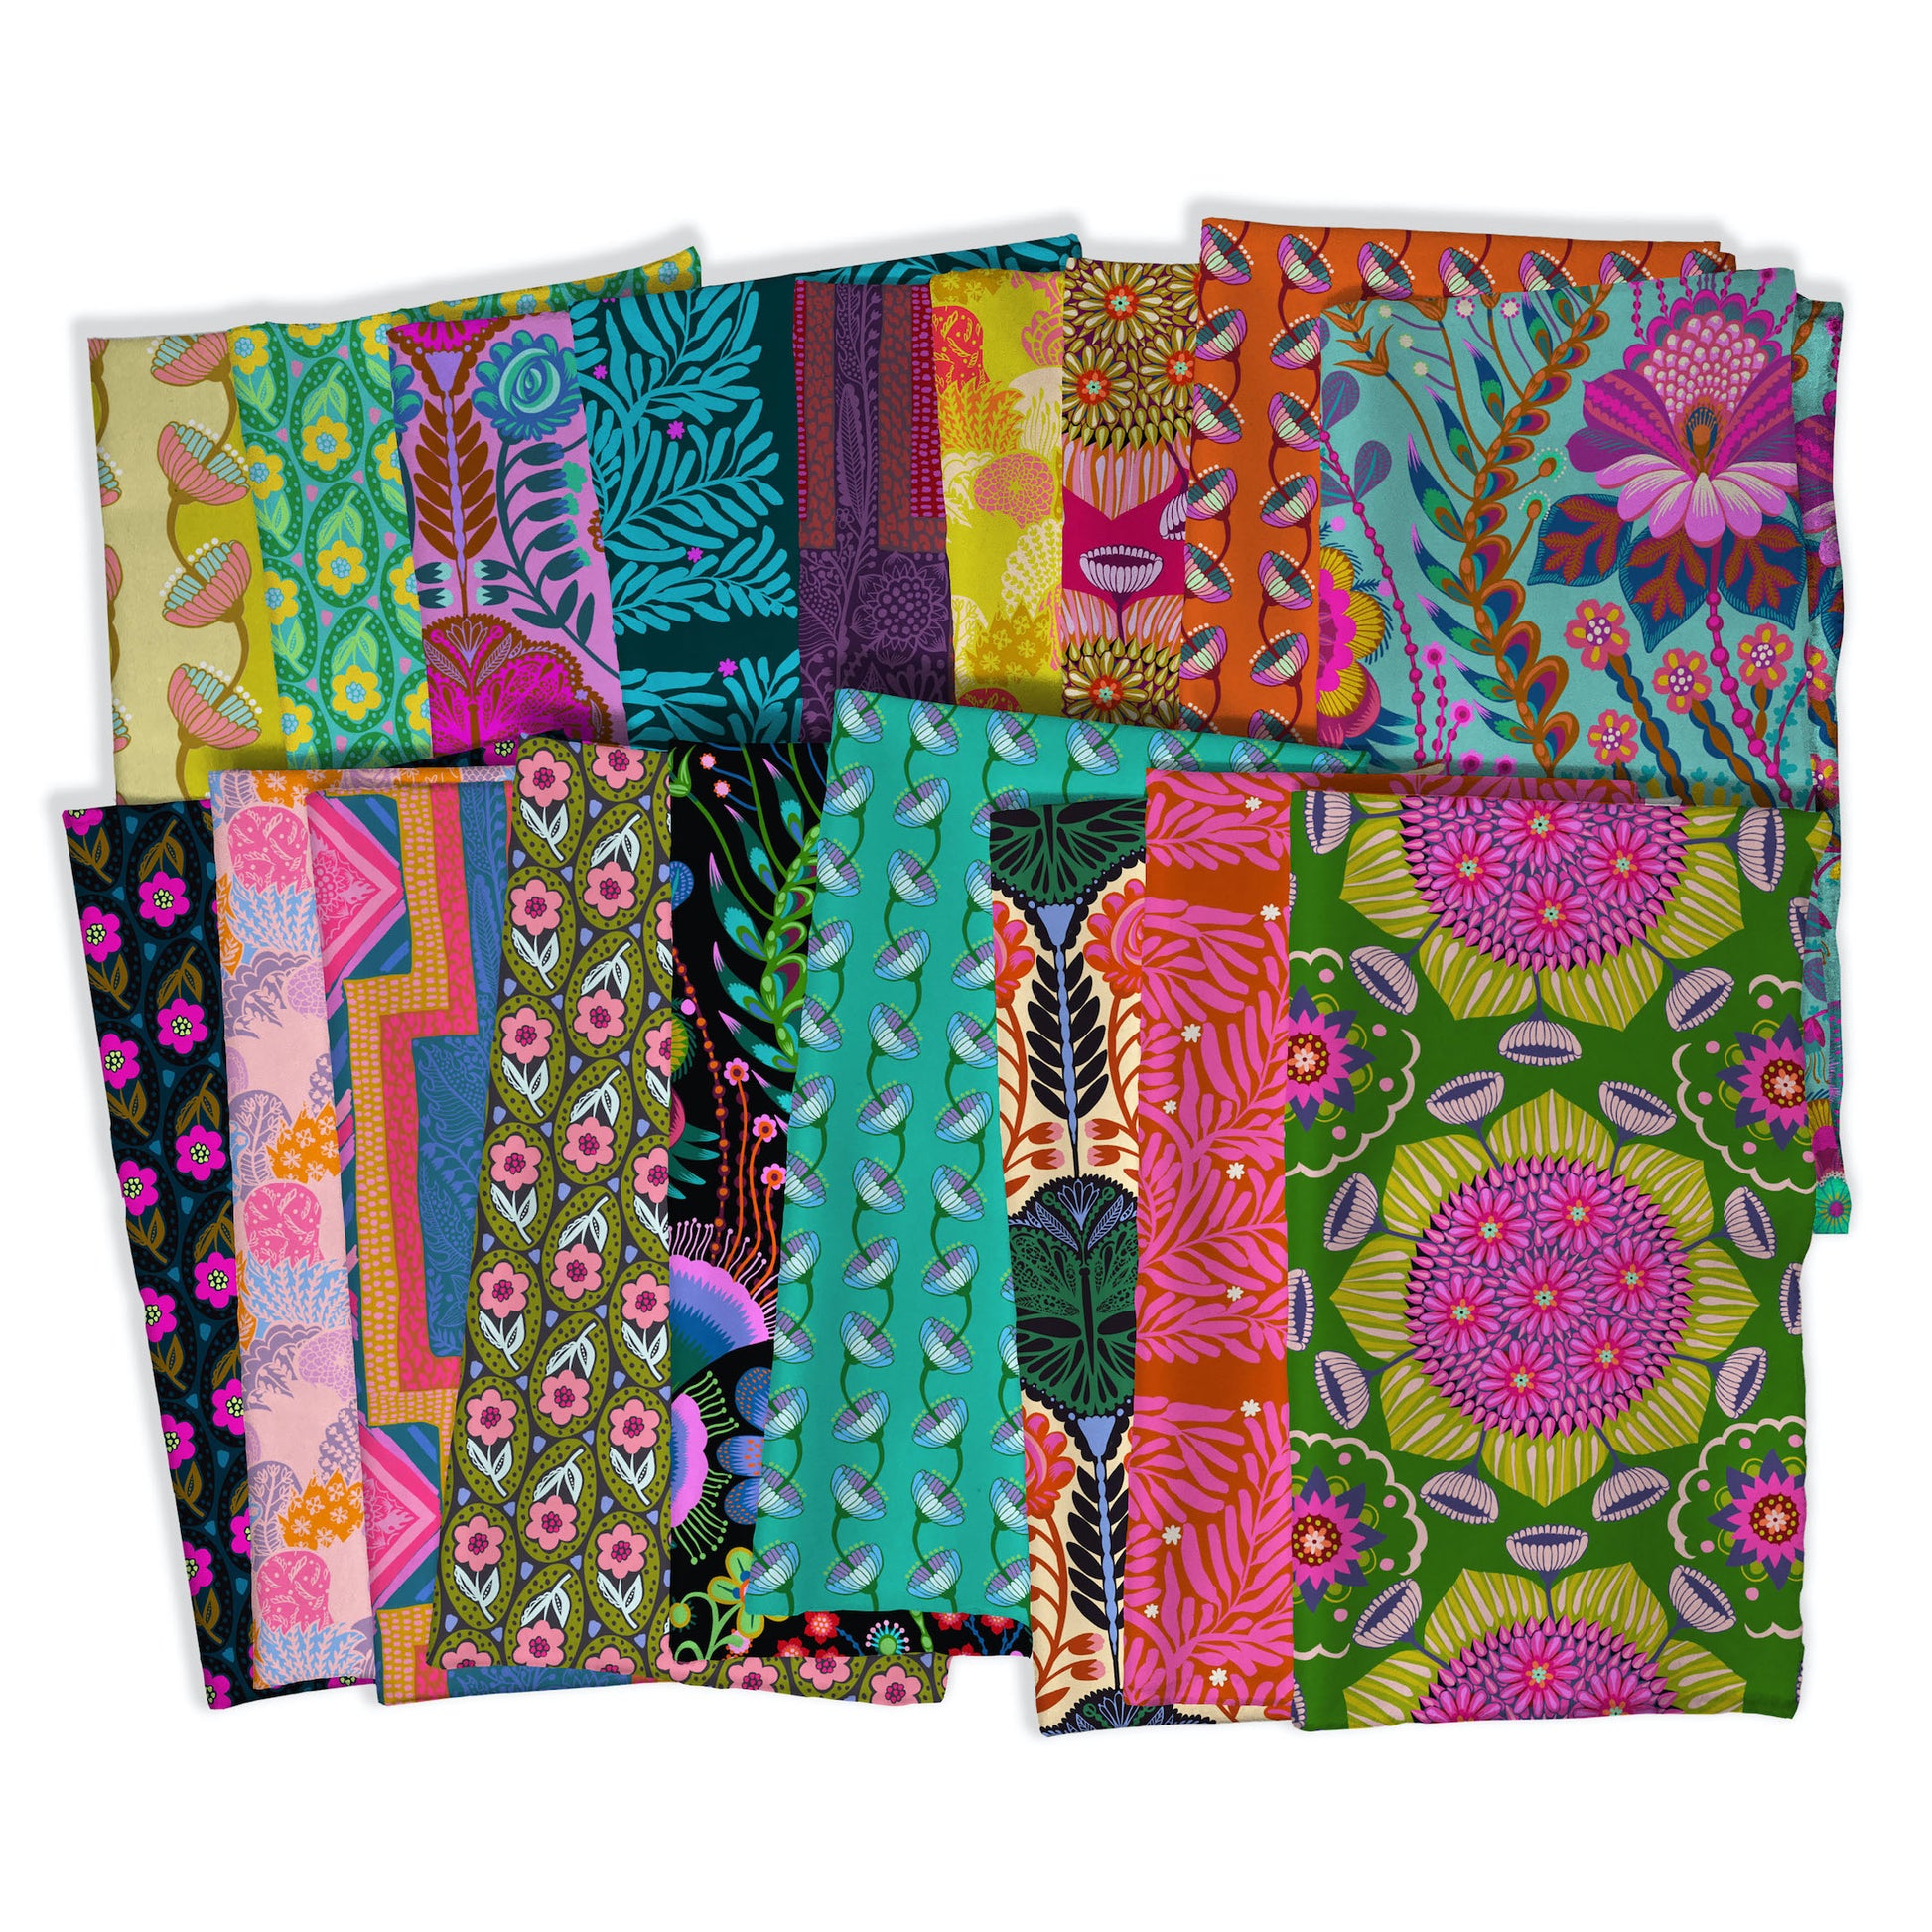 Anna Maria Brave fabric stack charm pack 10" available at 2 Sew textiles art quilt supplies